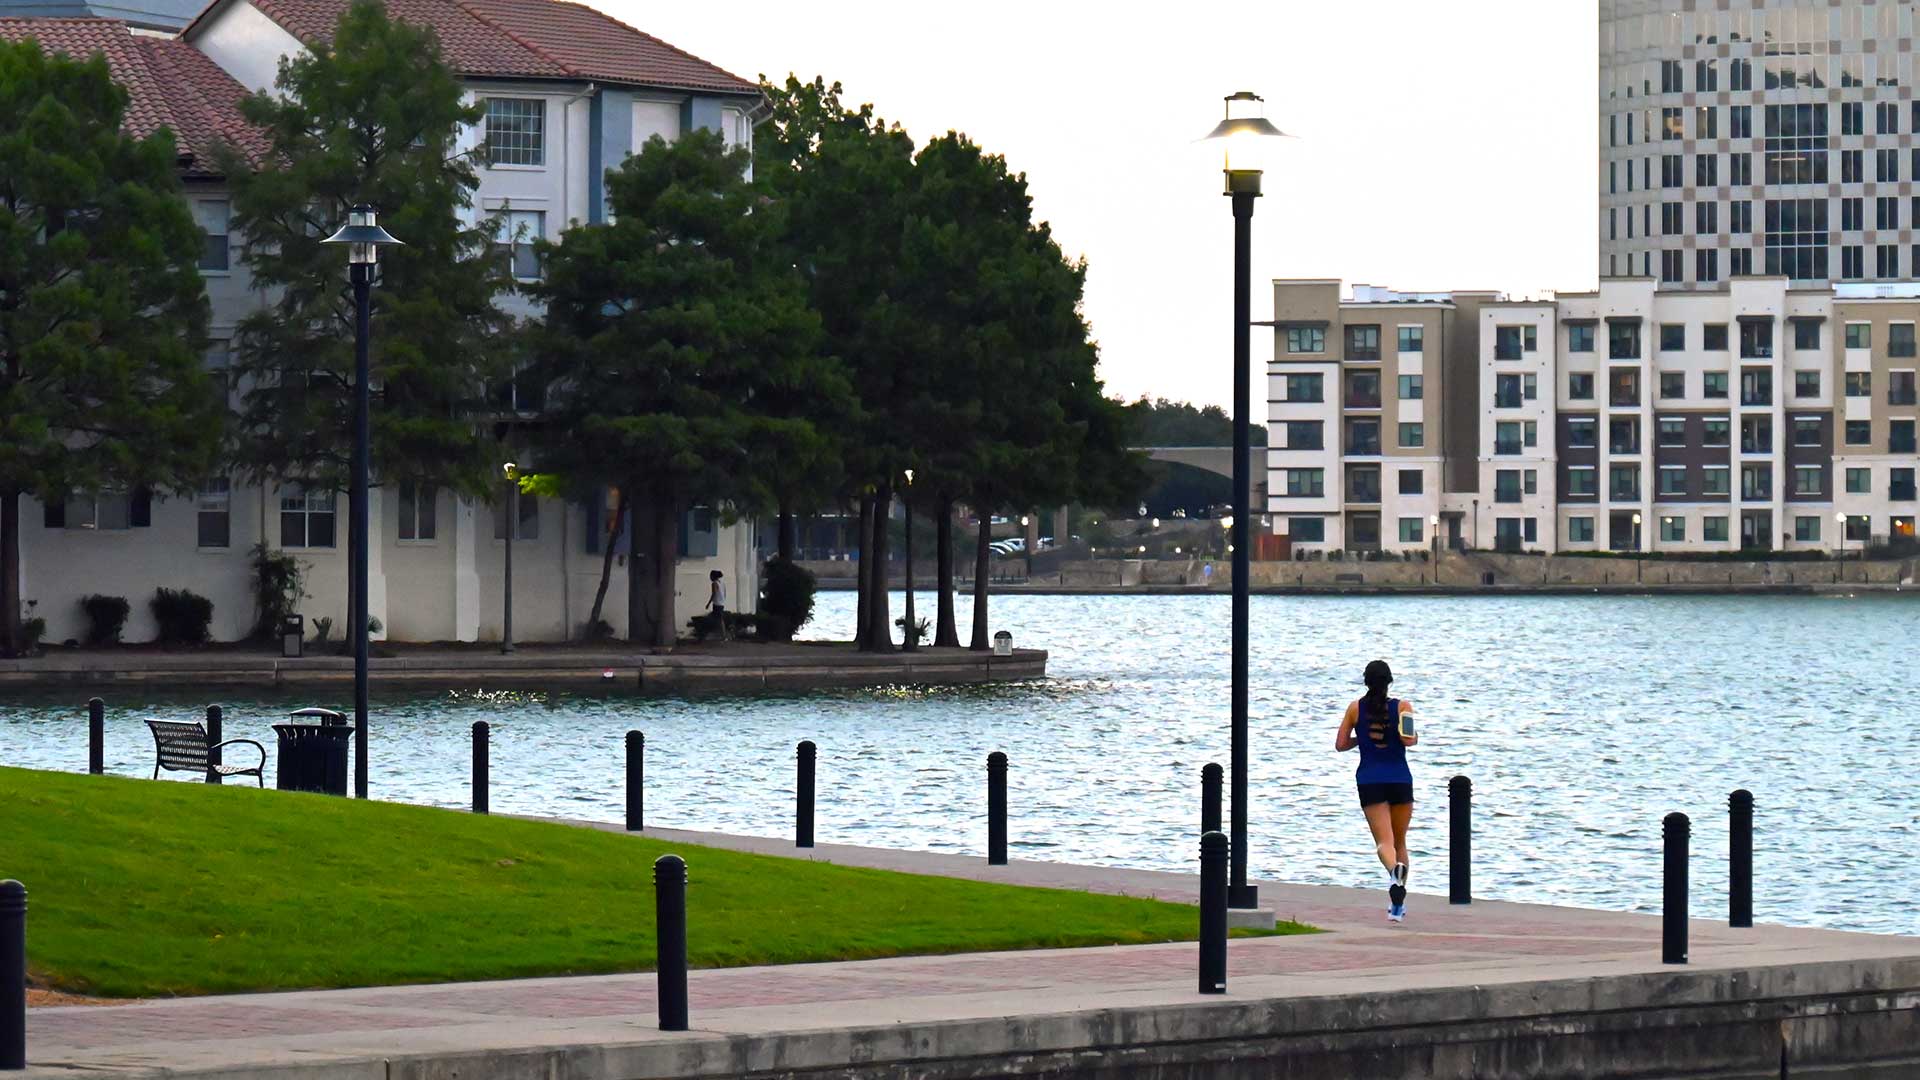 A woman jogs along a brick path along the shore of Lake Carolyn. The path heads off to the left where there are trees and a building. Another large building is seen across the lake on the right.